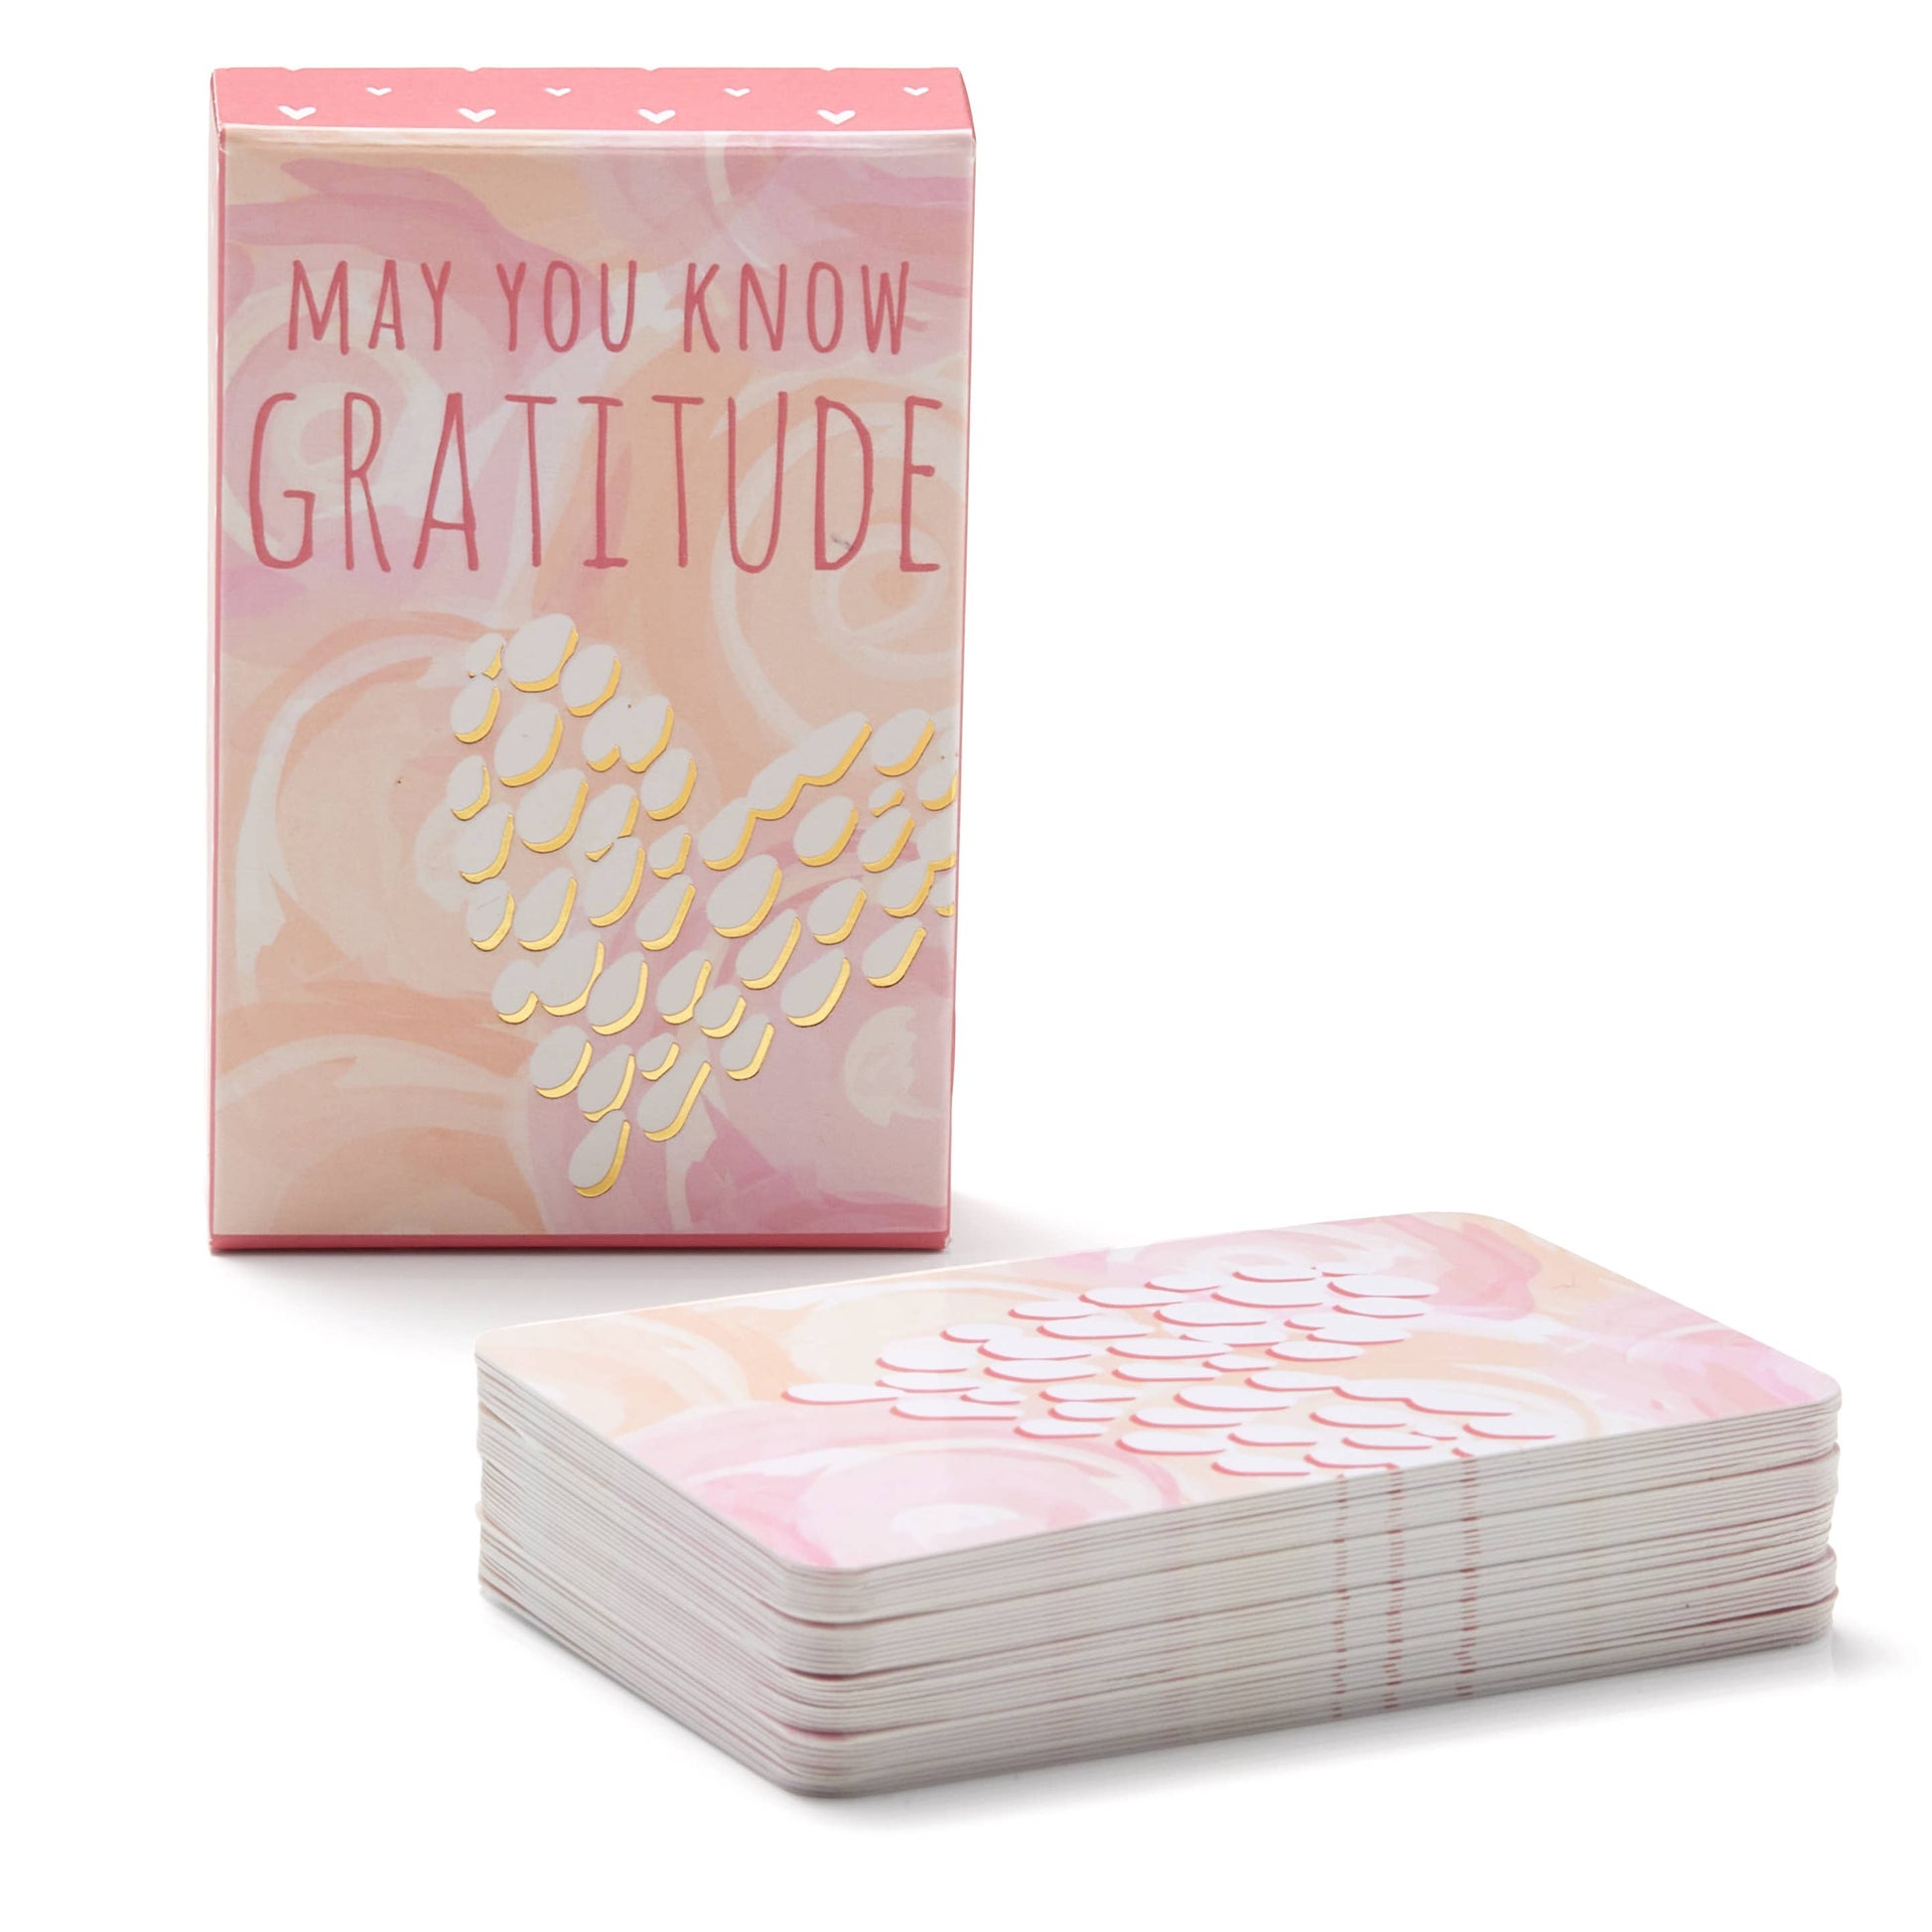 May You Know Gratitude - Intention Card Deck - Pluff Mud Mercantile